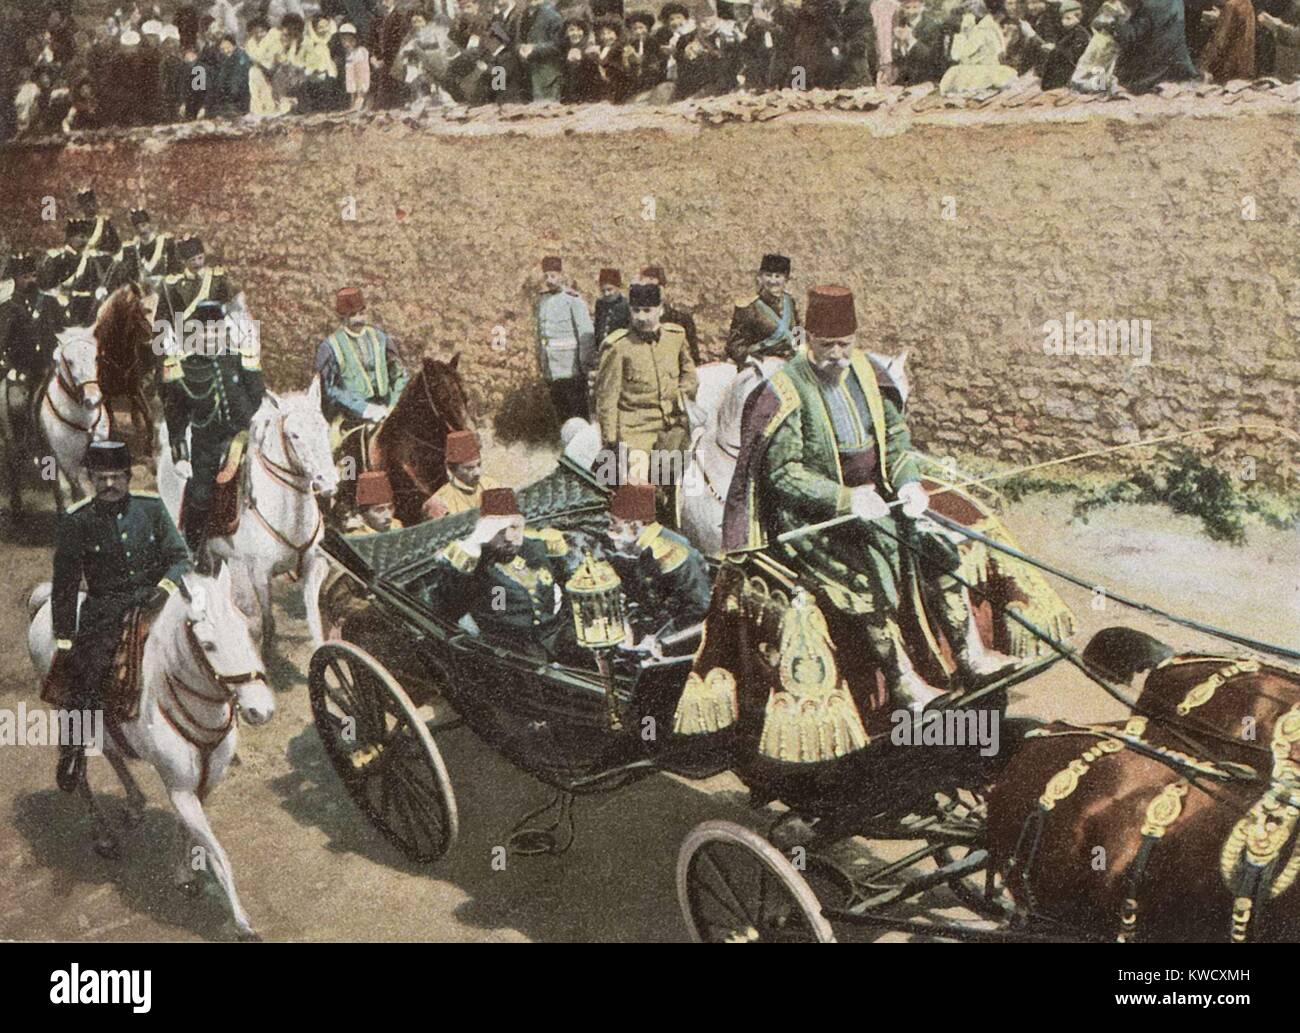 Young Turk leader, Enver Pasha, follows directly behind the carriage of Ottoman Sultan Mehmed V. They parade in Istanbul after the installation of Mehmed V, replacing his deposed brother, Sultan Abdul Hamid II (BSLOC 2017 1 104) Stock Photo